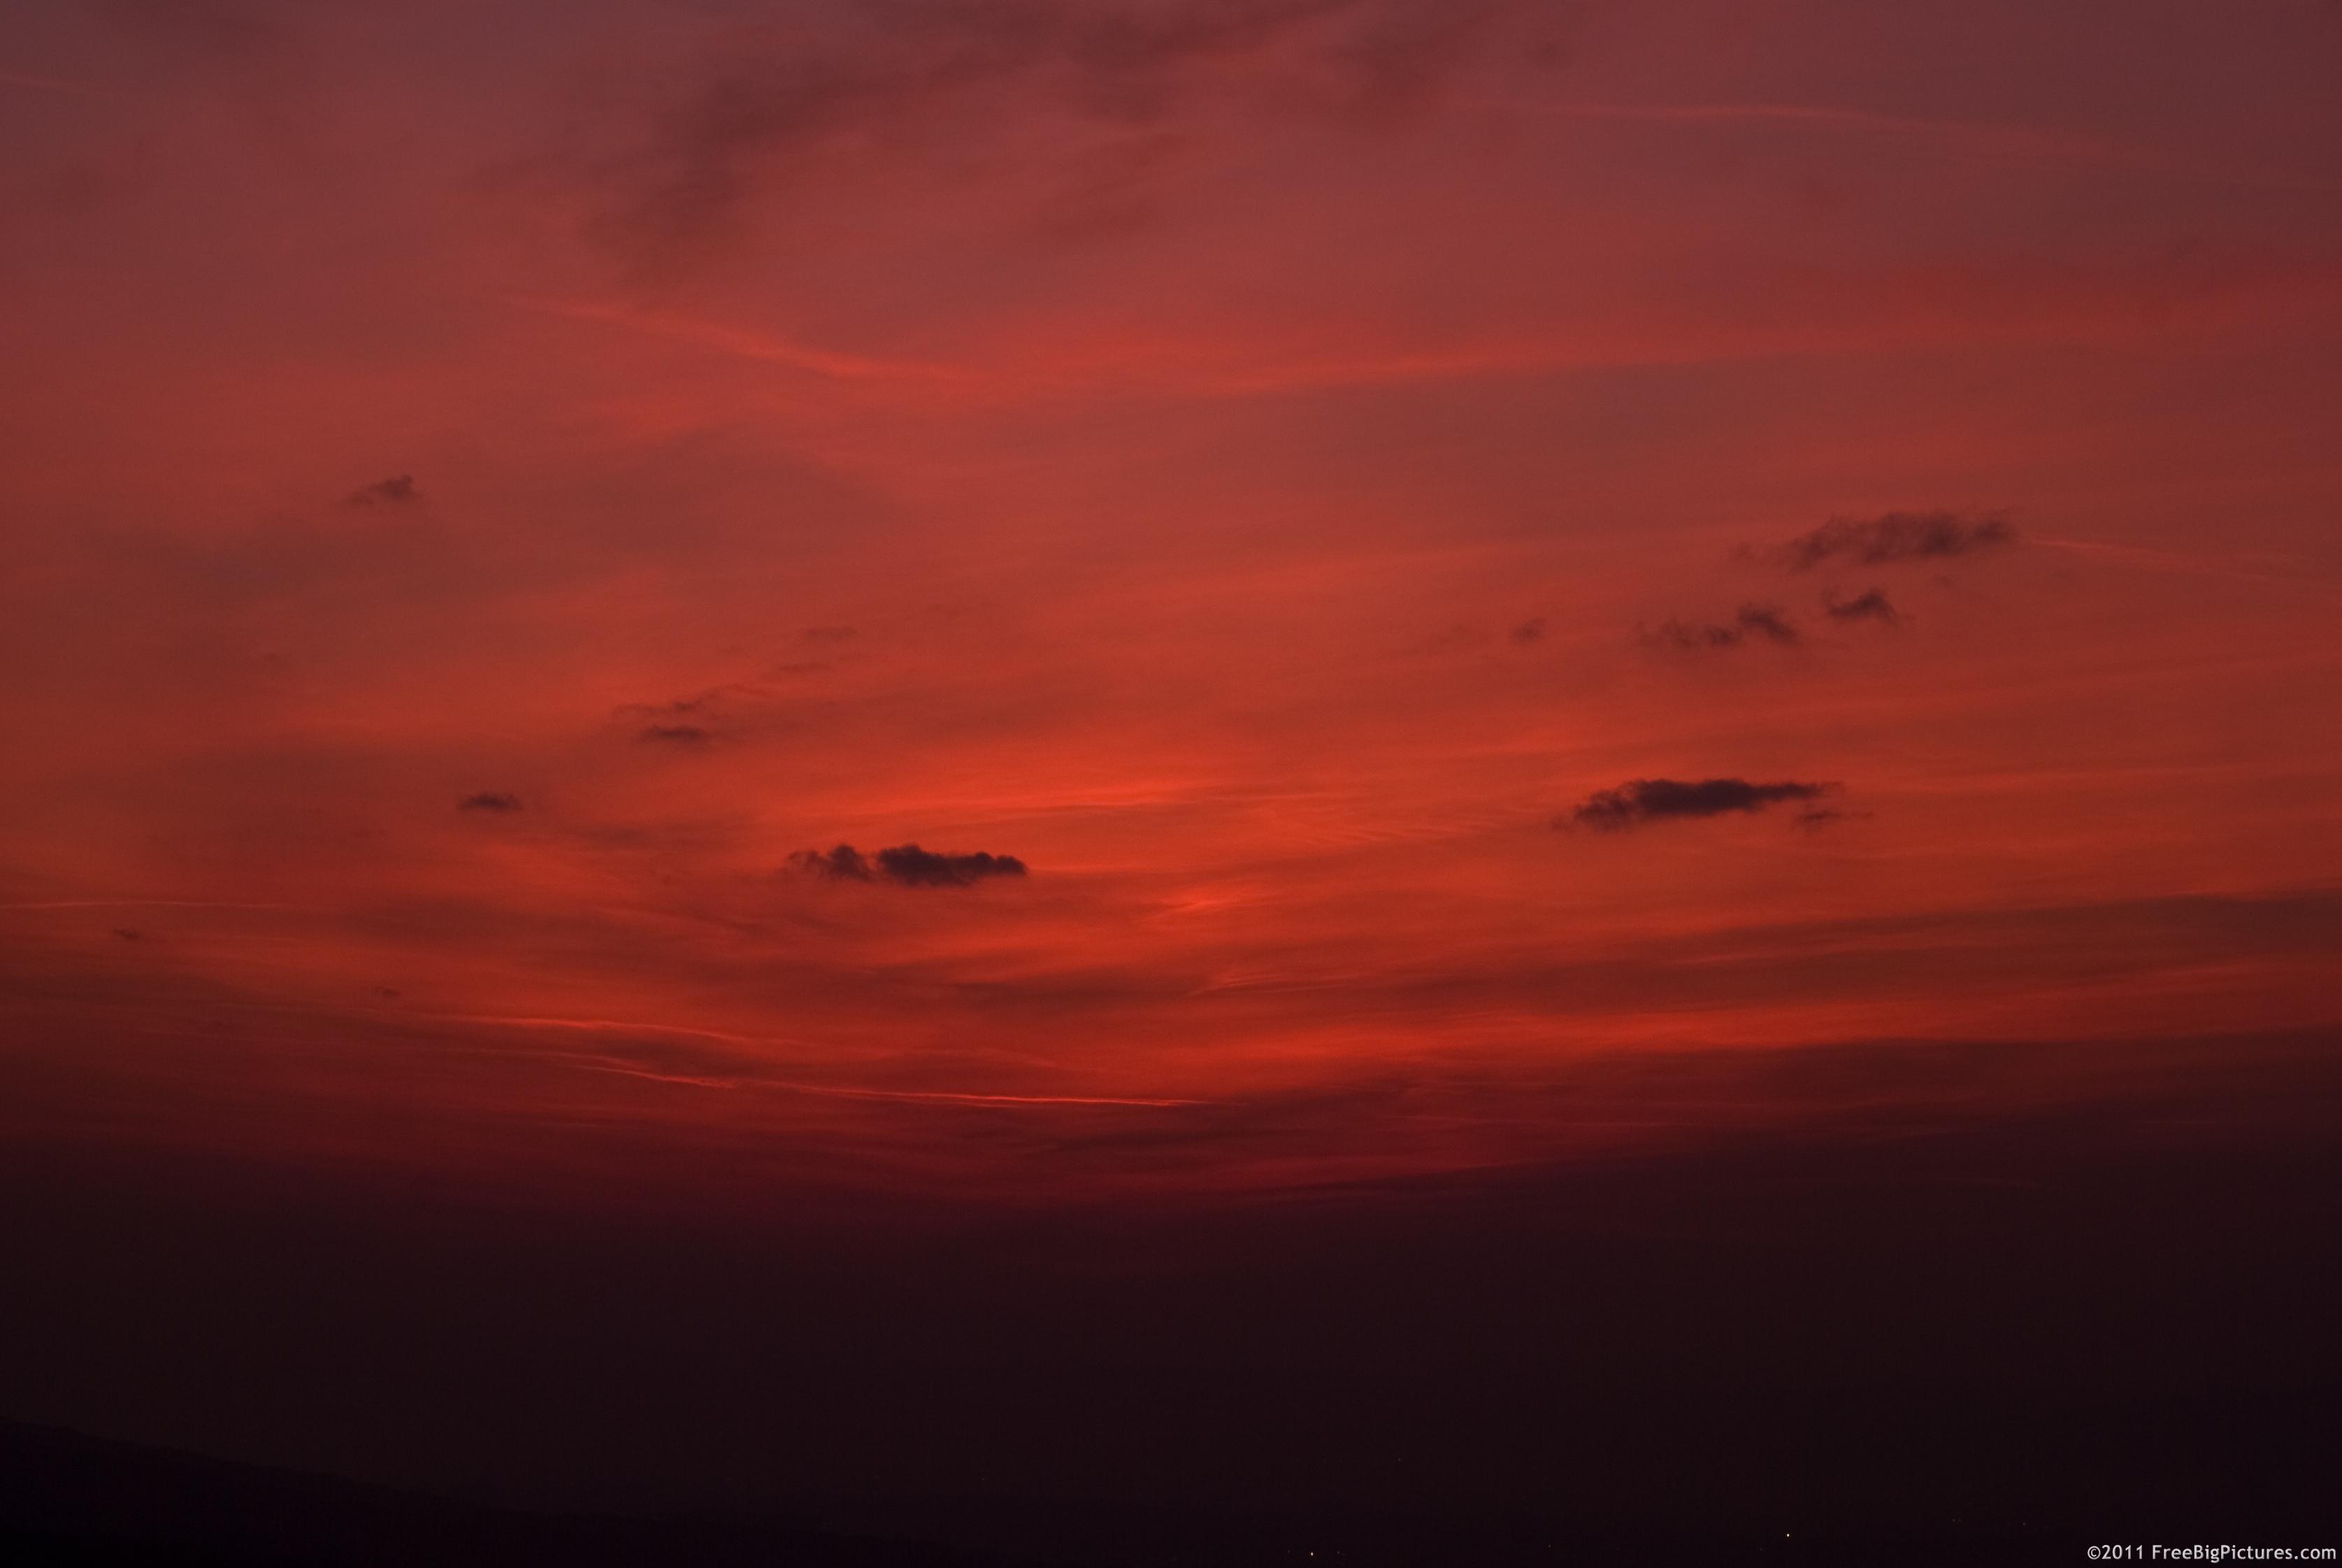 Sky with reddish hues after sunset